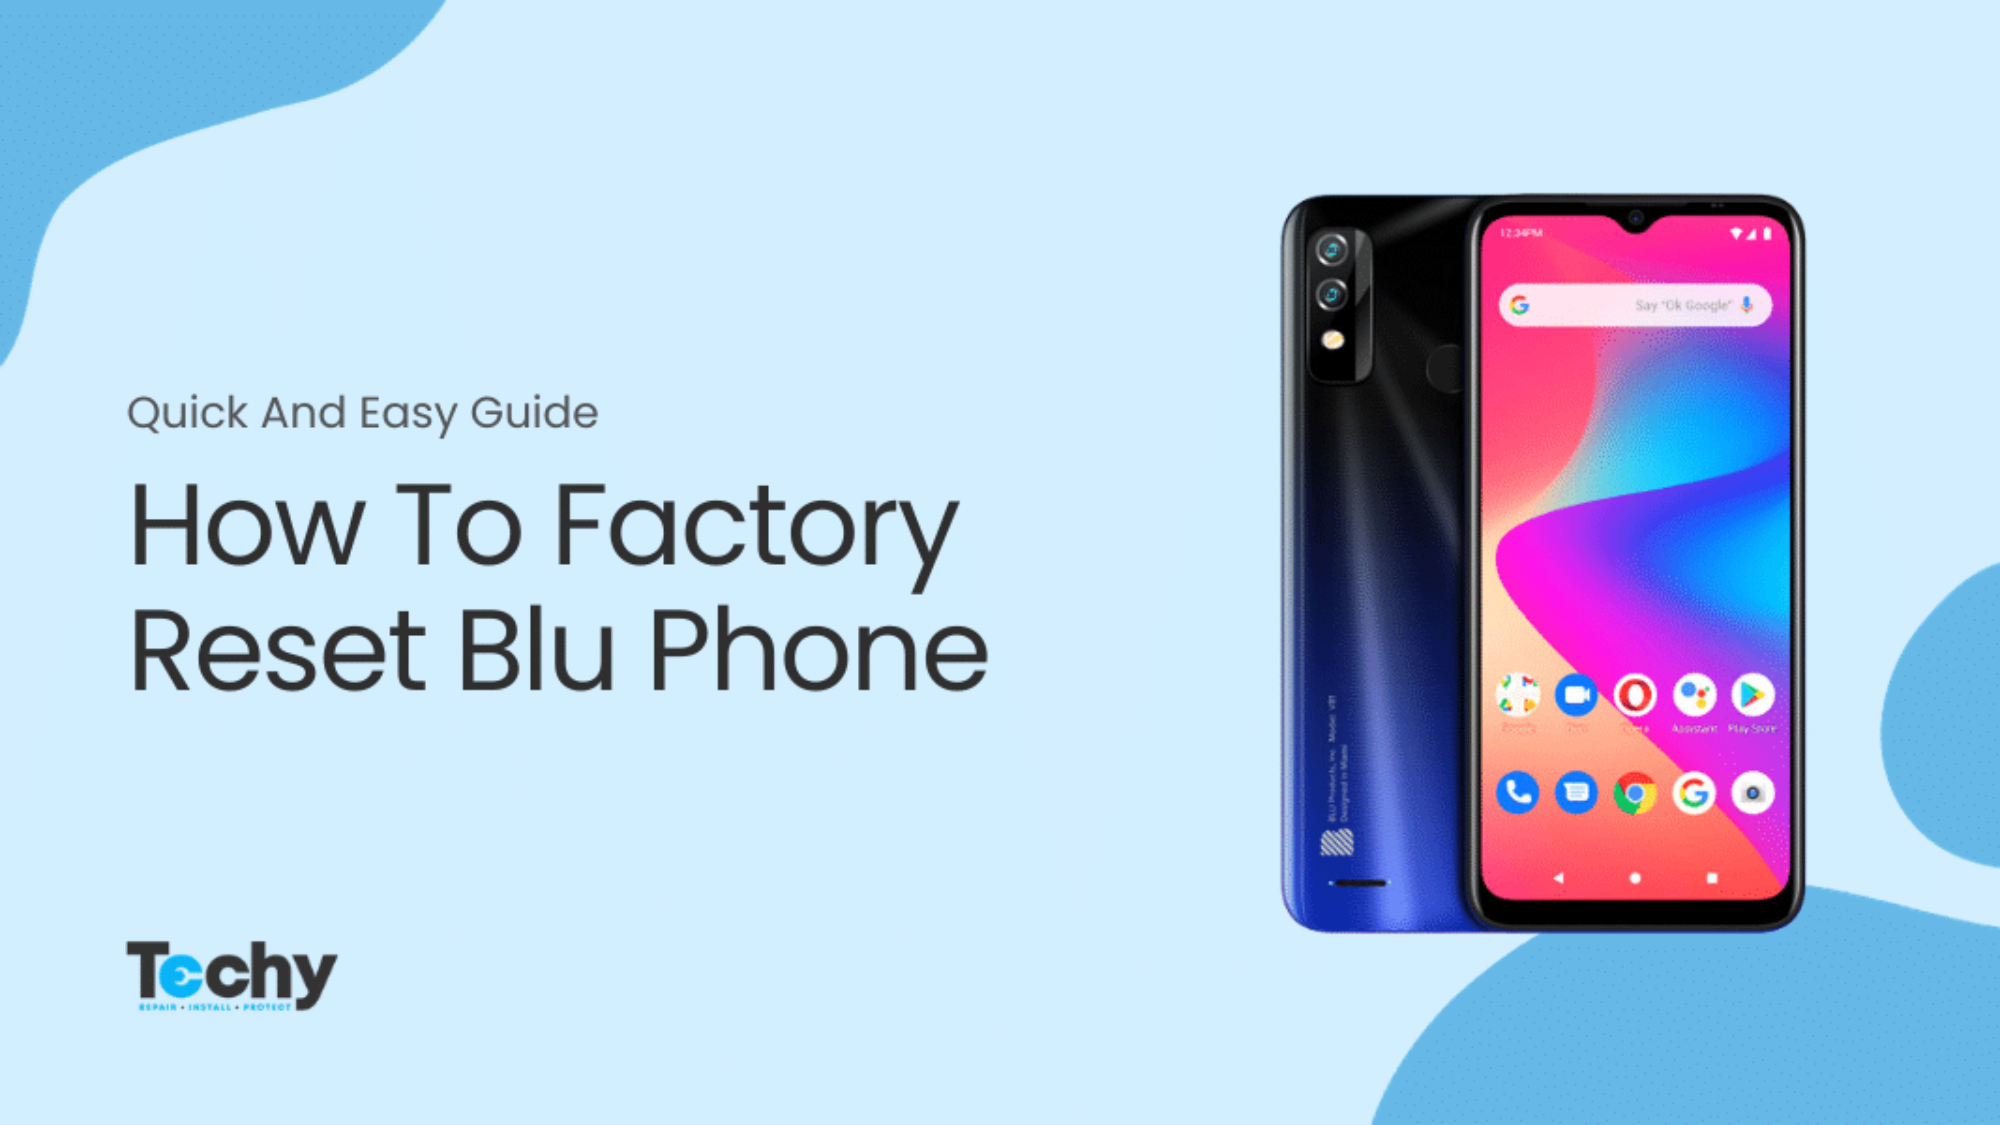 How To Factory Reset BLU Phone